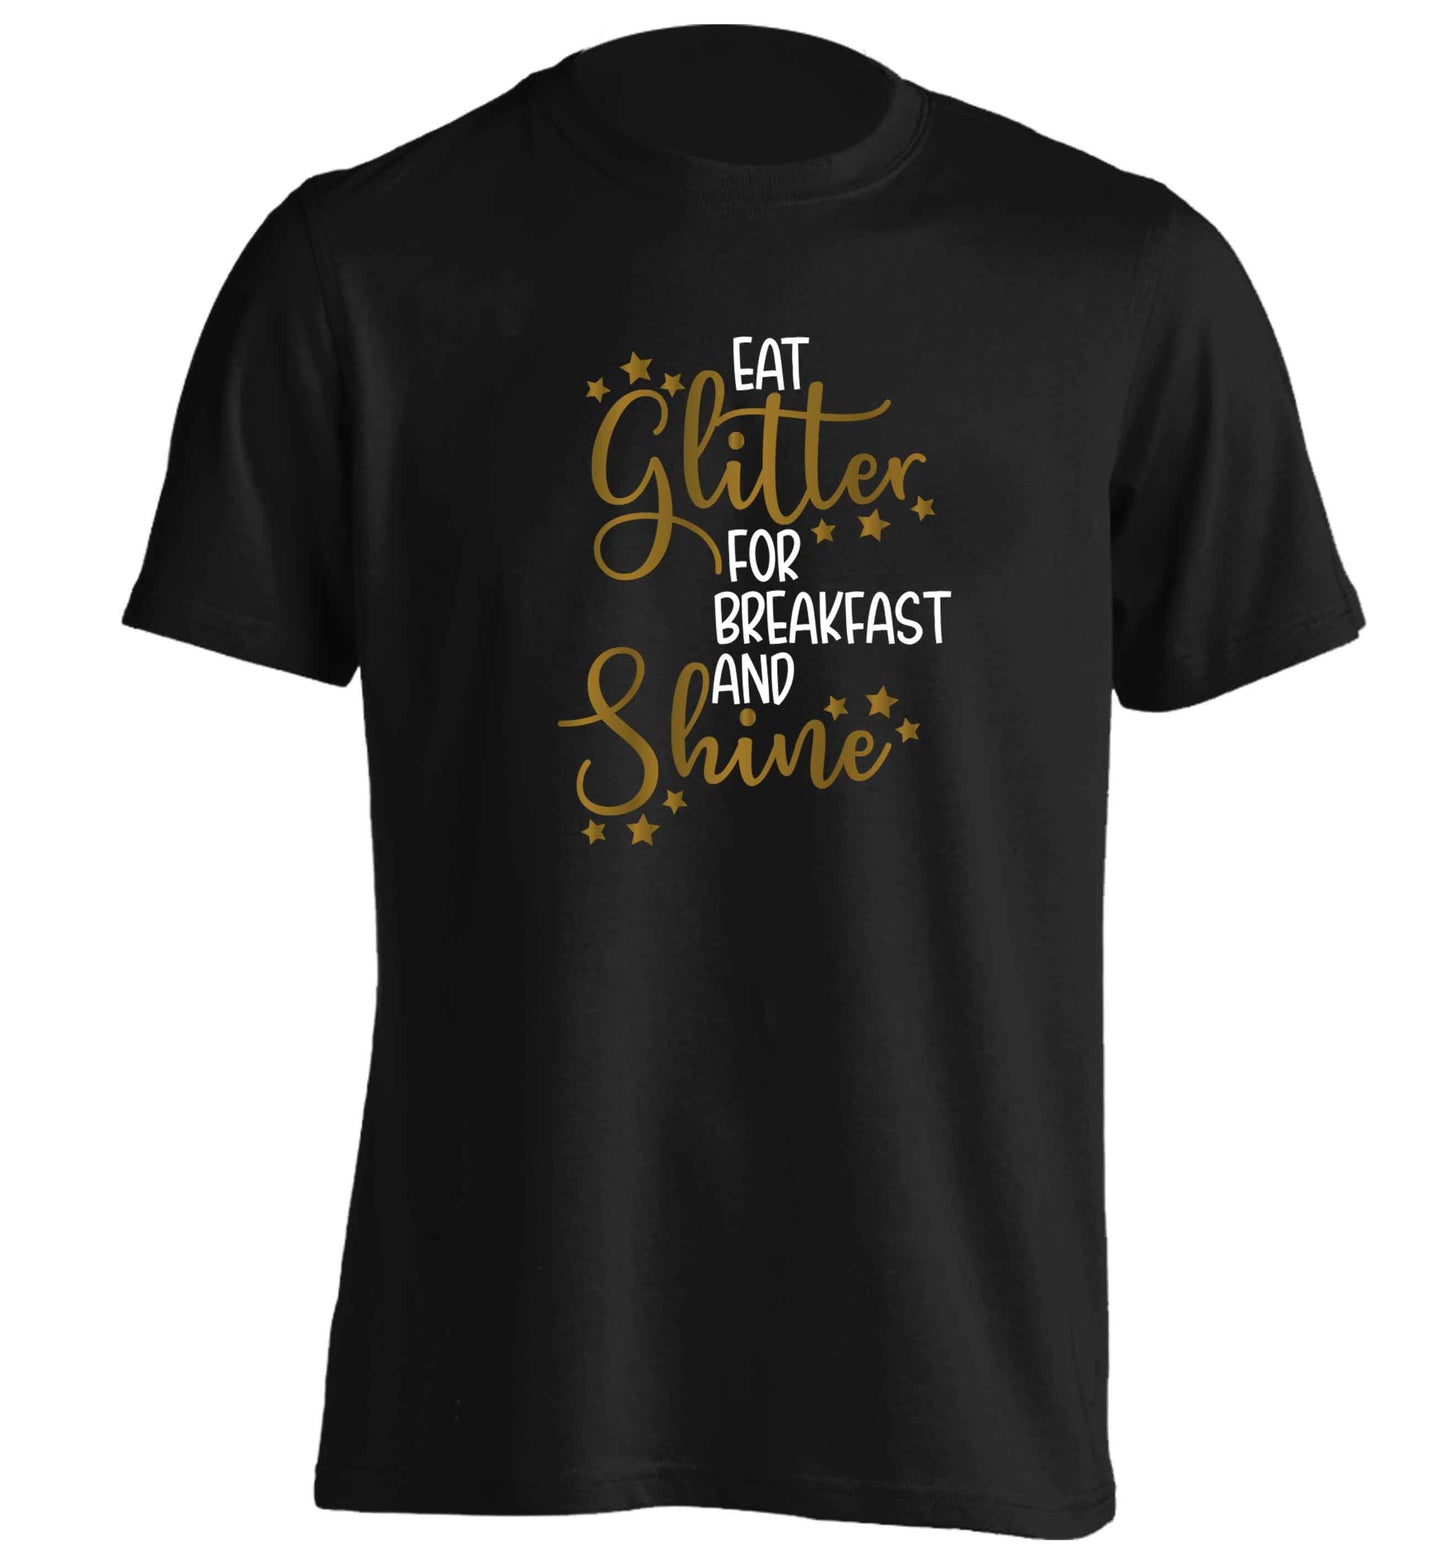 Eat glitter for breakfast and shine all day adults unisex black Tshirt 2XL